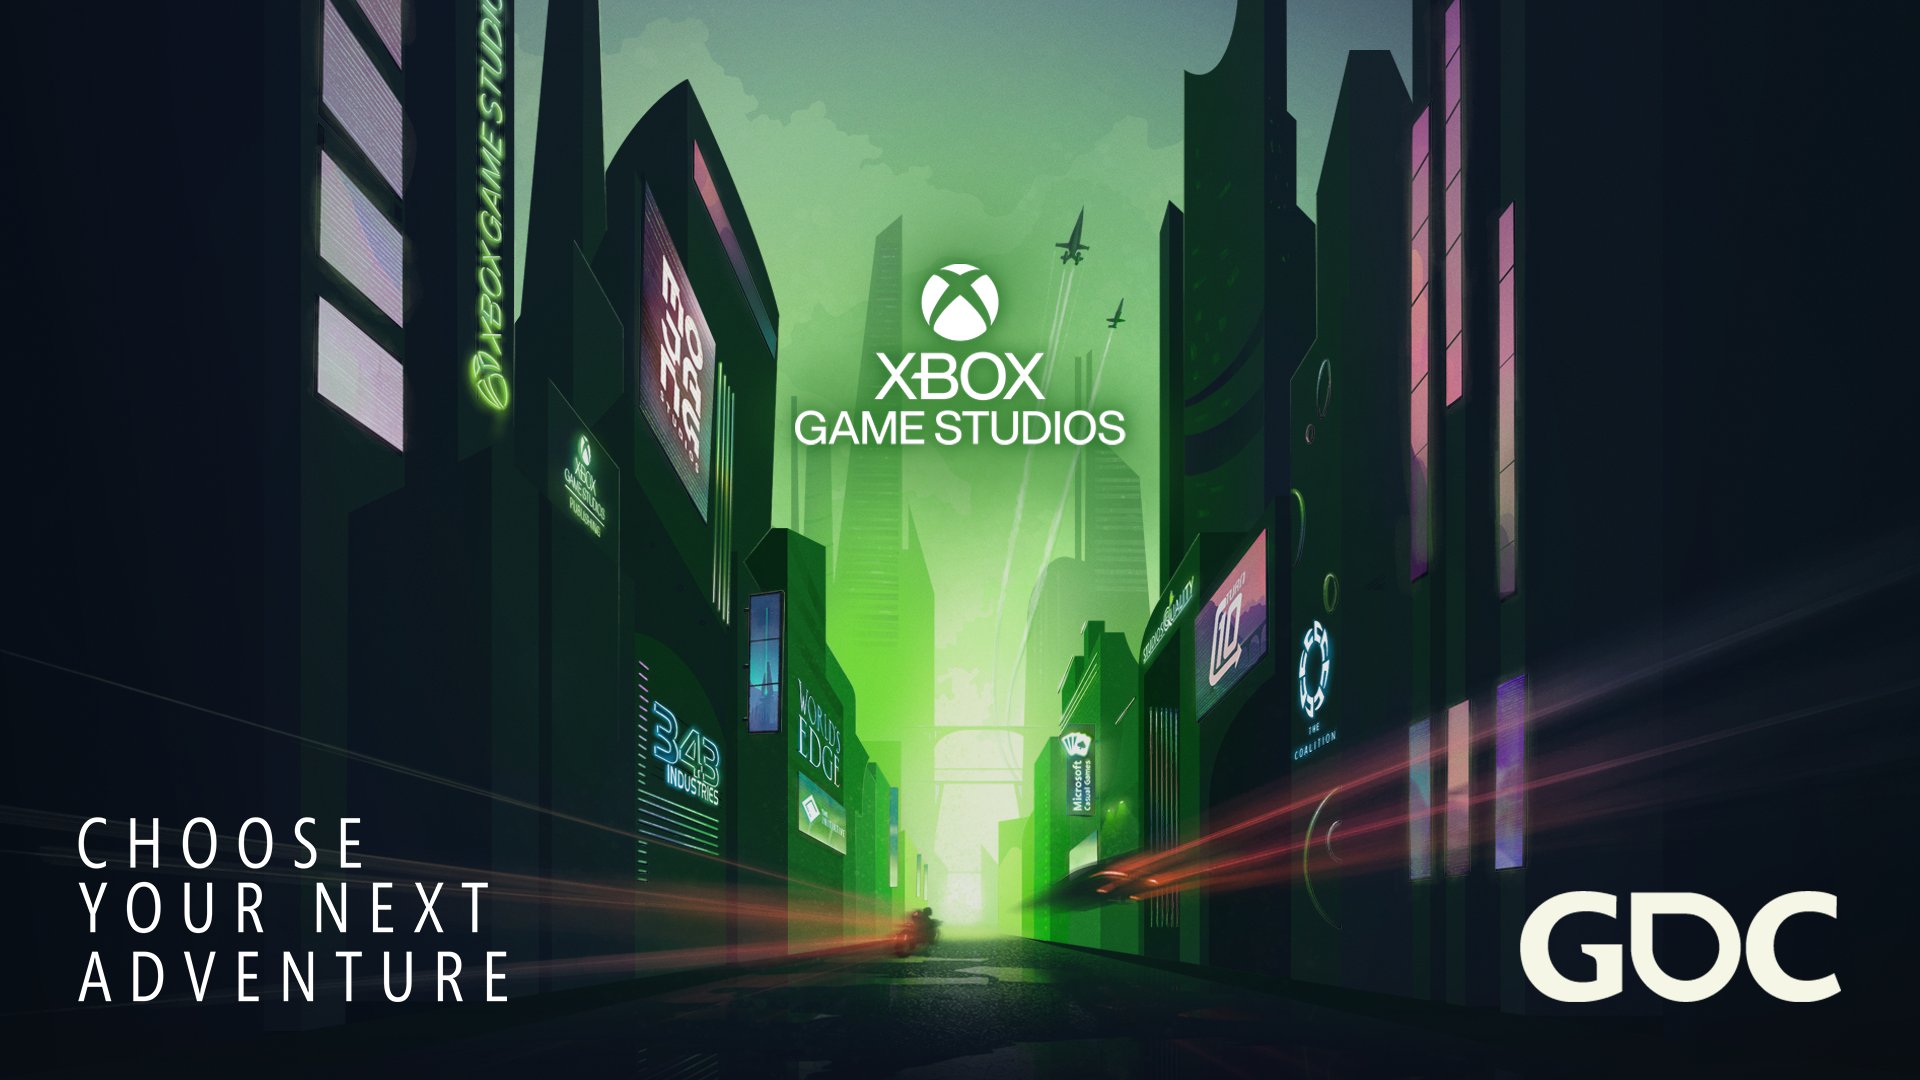 High-contrast futuristic cityscape featuring flying car and flying motorcycle at high speed between tall building exhibiting neon logos from first-party Xbox Game Studios, including 343, Mojang, The Coalition, Turn 10, Xbox Game Studios Publishing, World’s Edge, Microsoft Casual Games and The Initiative, with Xbox Game Studios logo sitting in sky horizon.